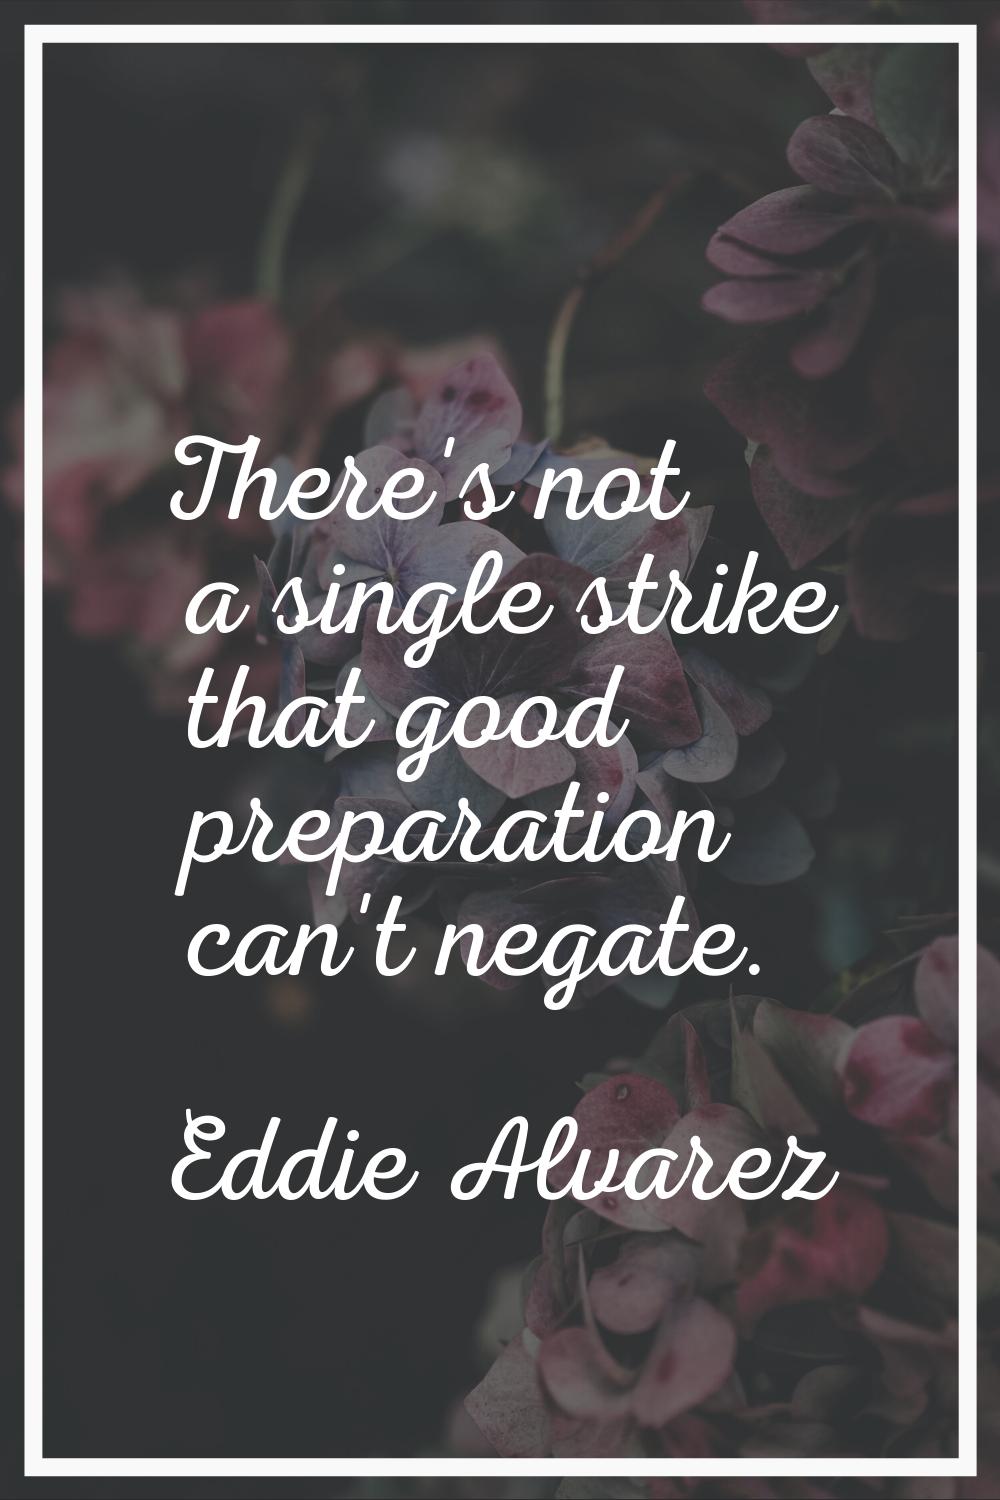 There's not a single strike that good preparation can't negate.